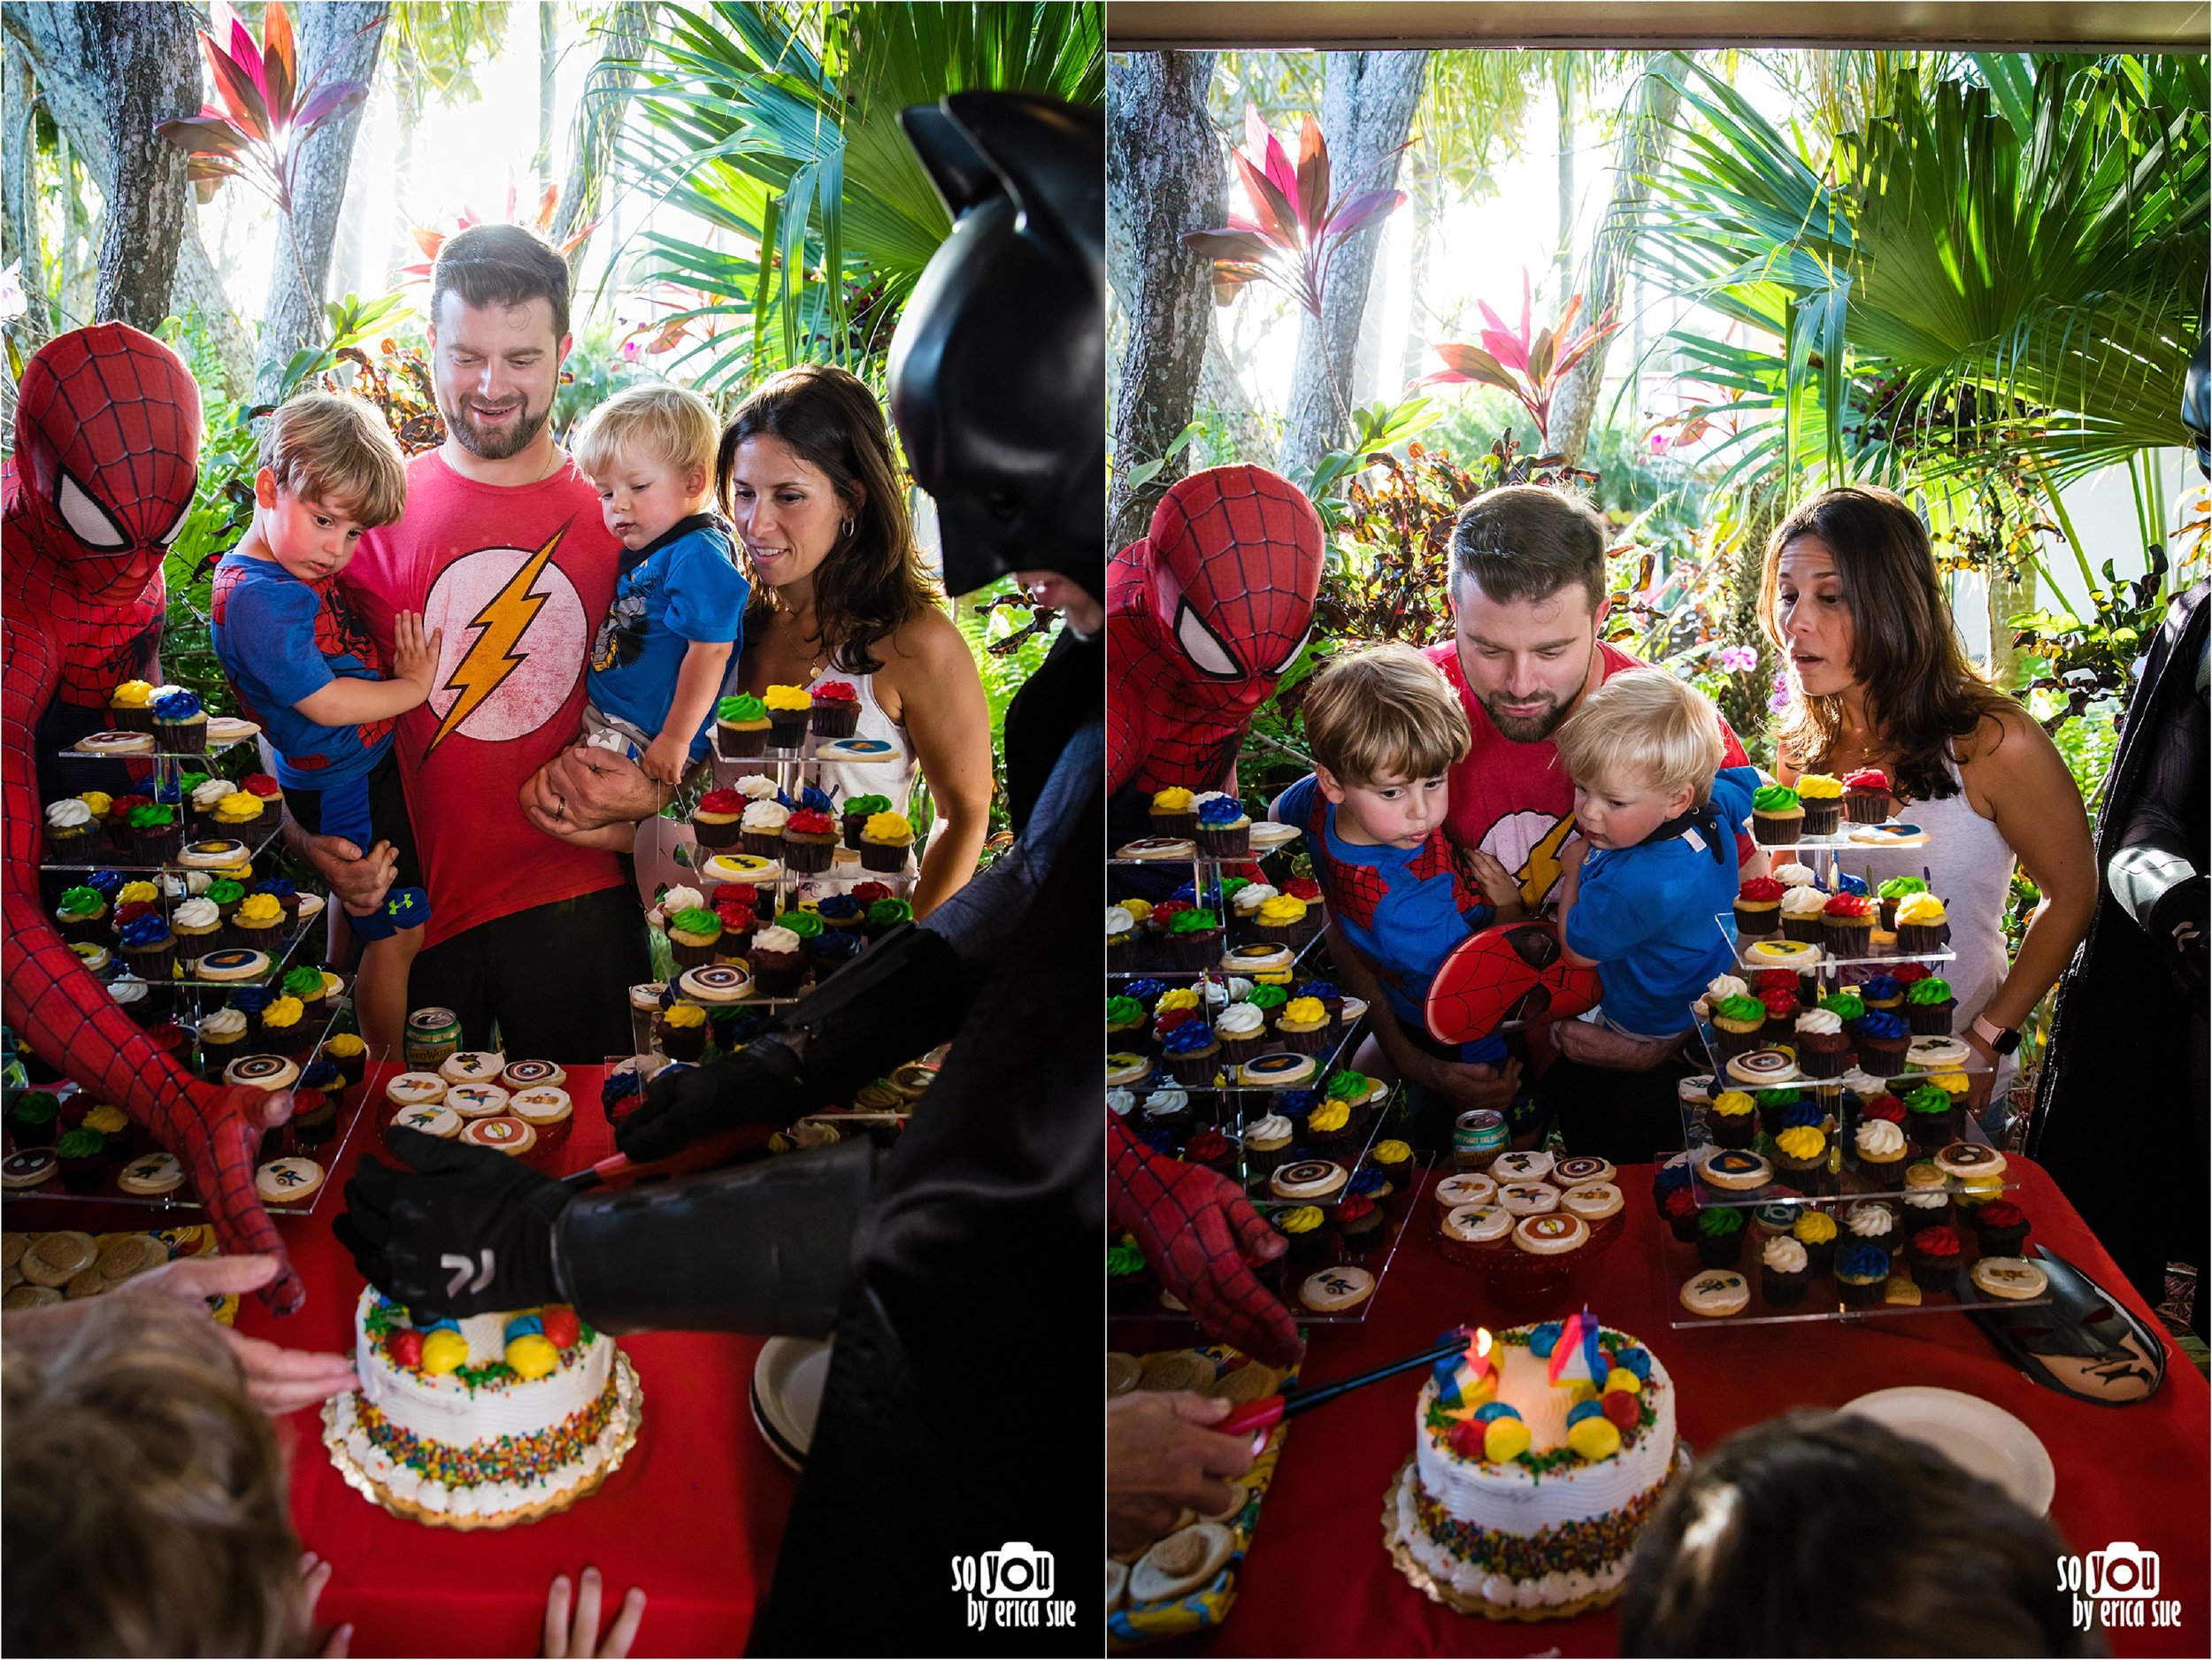 so-you-by-erica-sue-miami-birthday-party-event-photographer-8766 (2).jpg